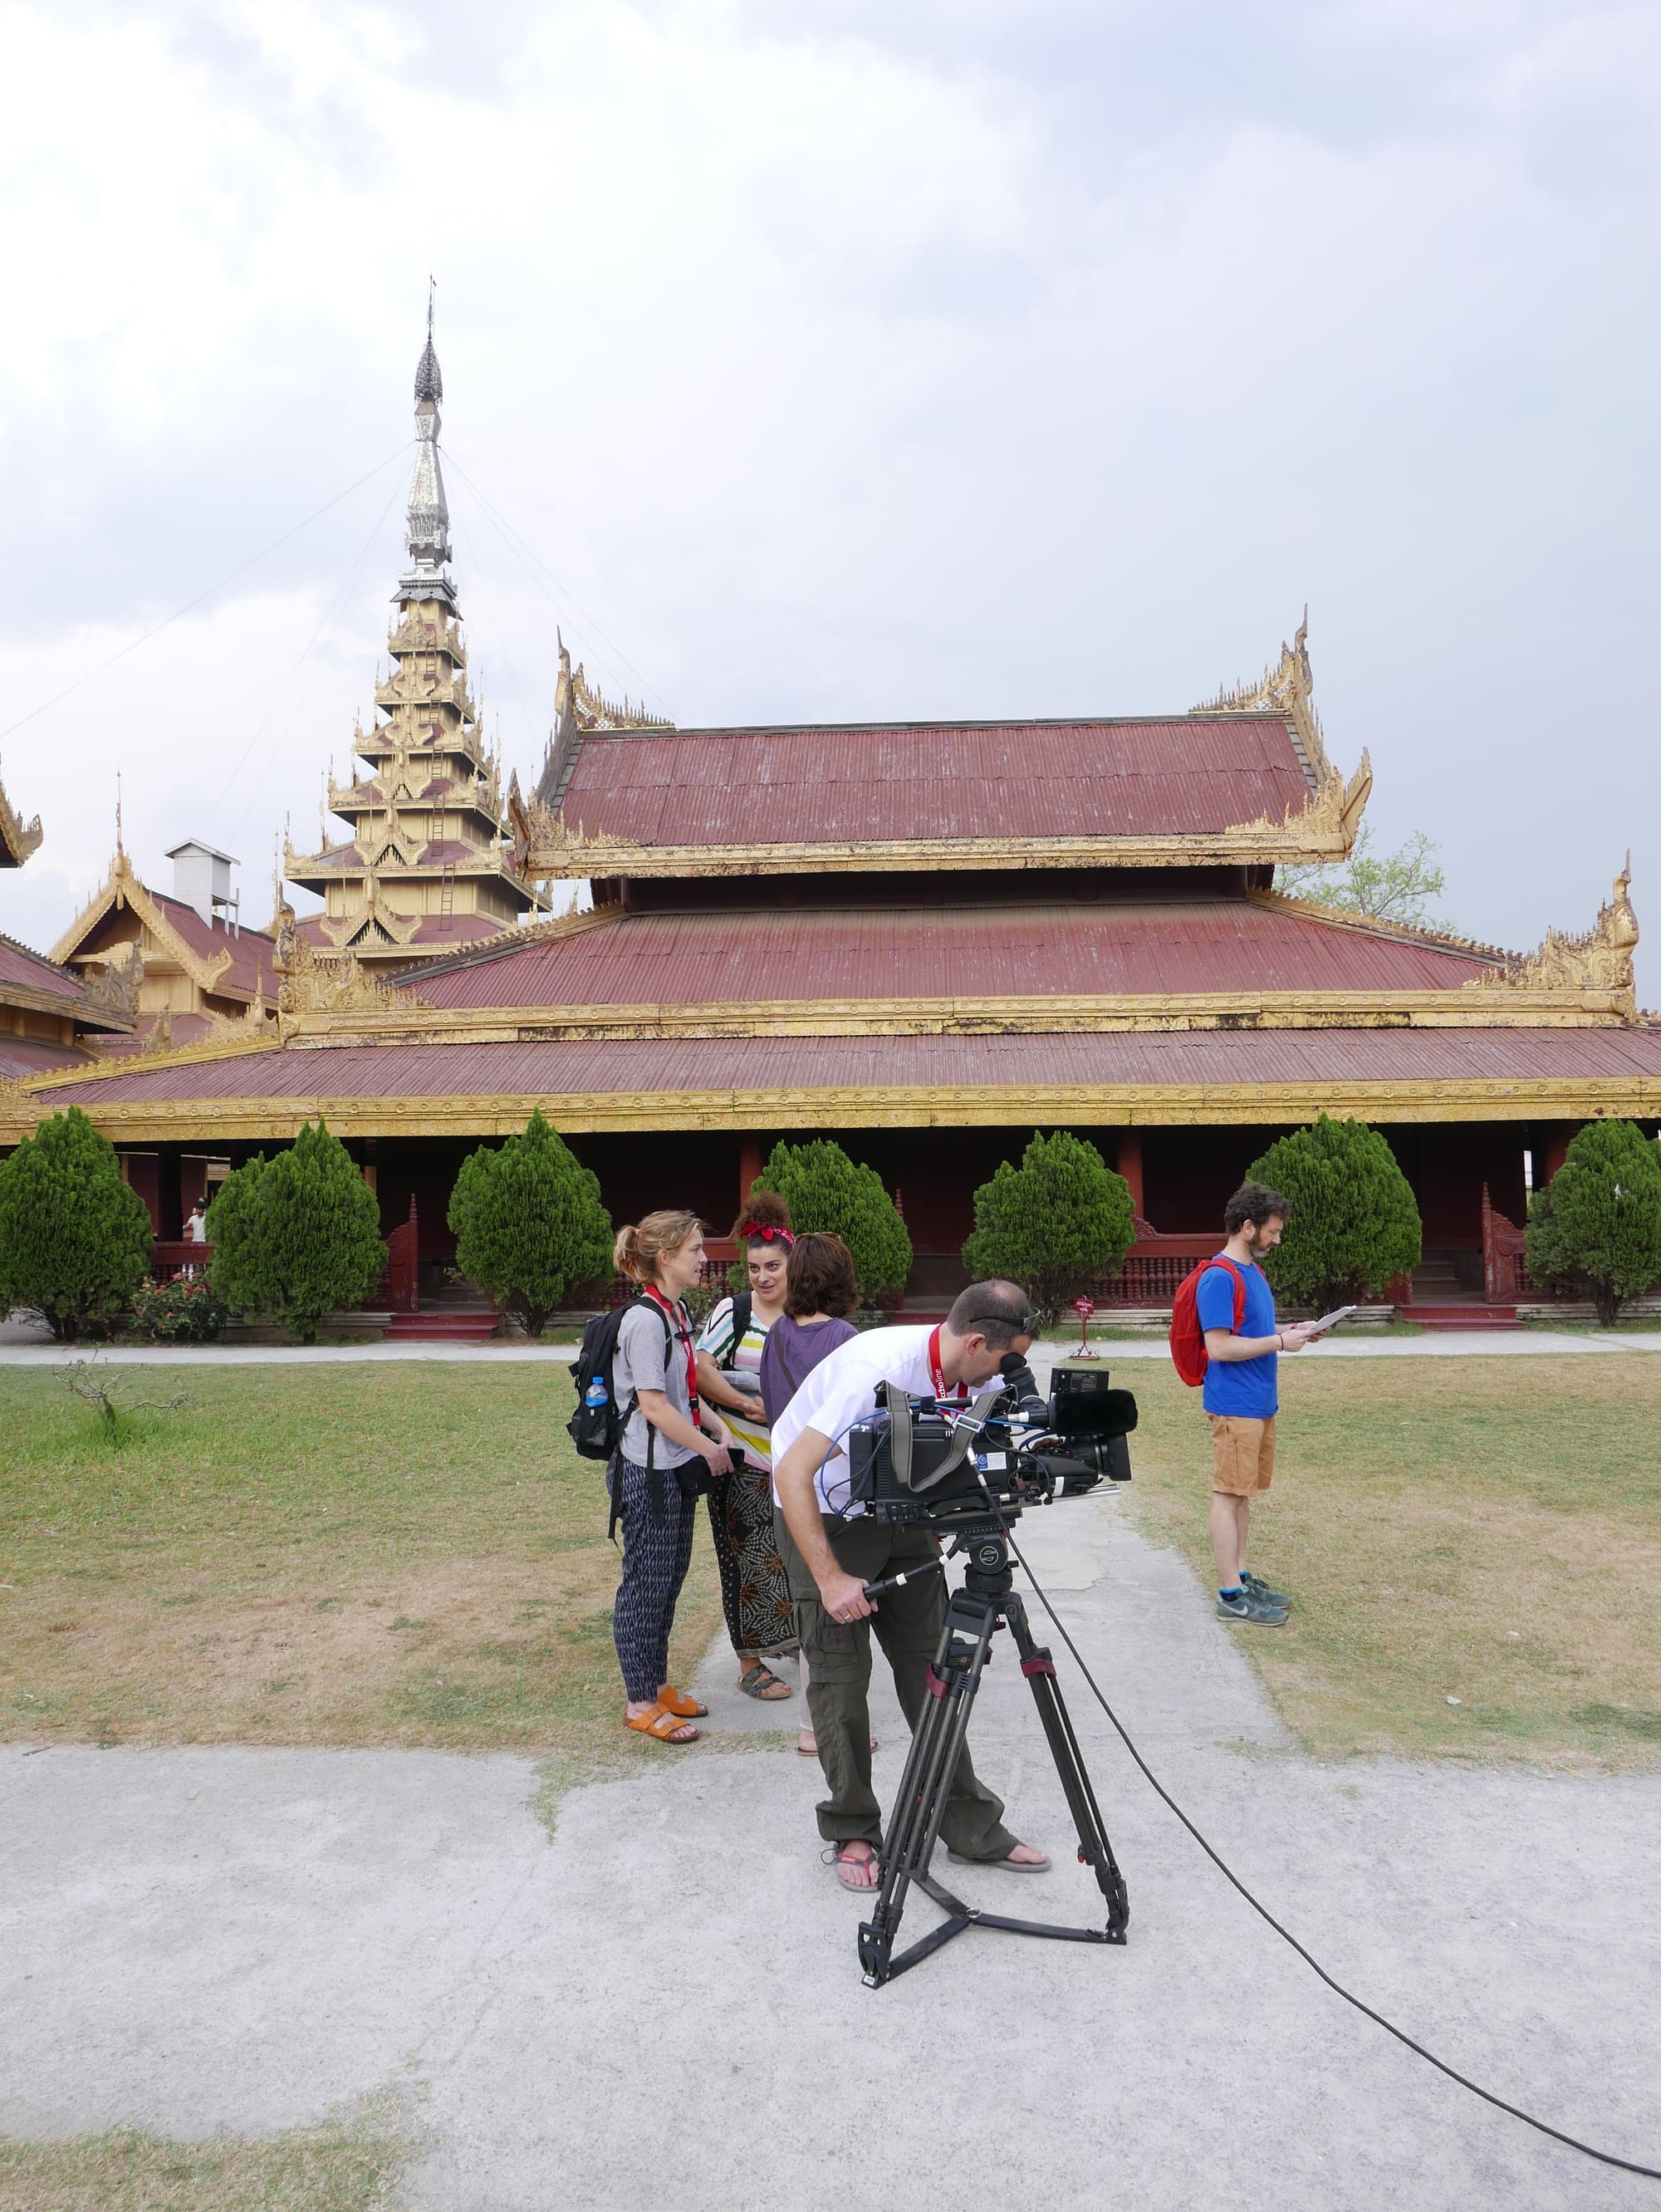 Photo by Author — filming in the palace — no photographs allowed